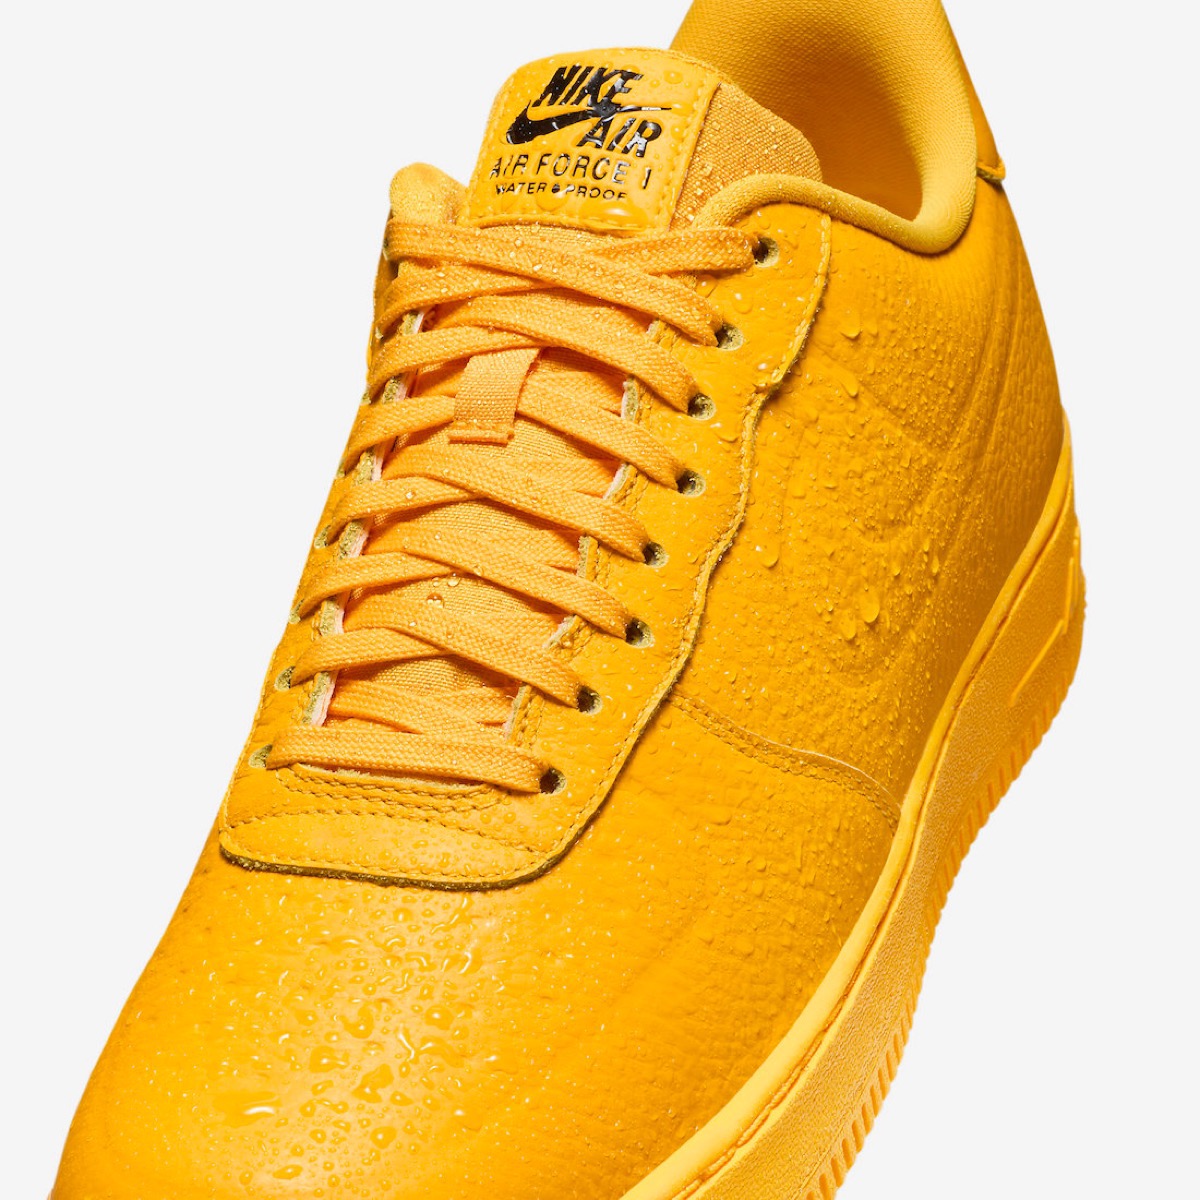 Nike Air Force 1 Low Pro-Tech “University Gold”が国内12月1日より